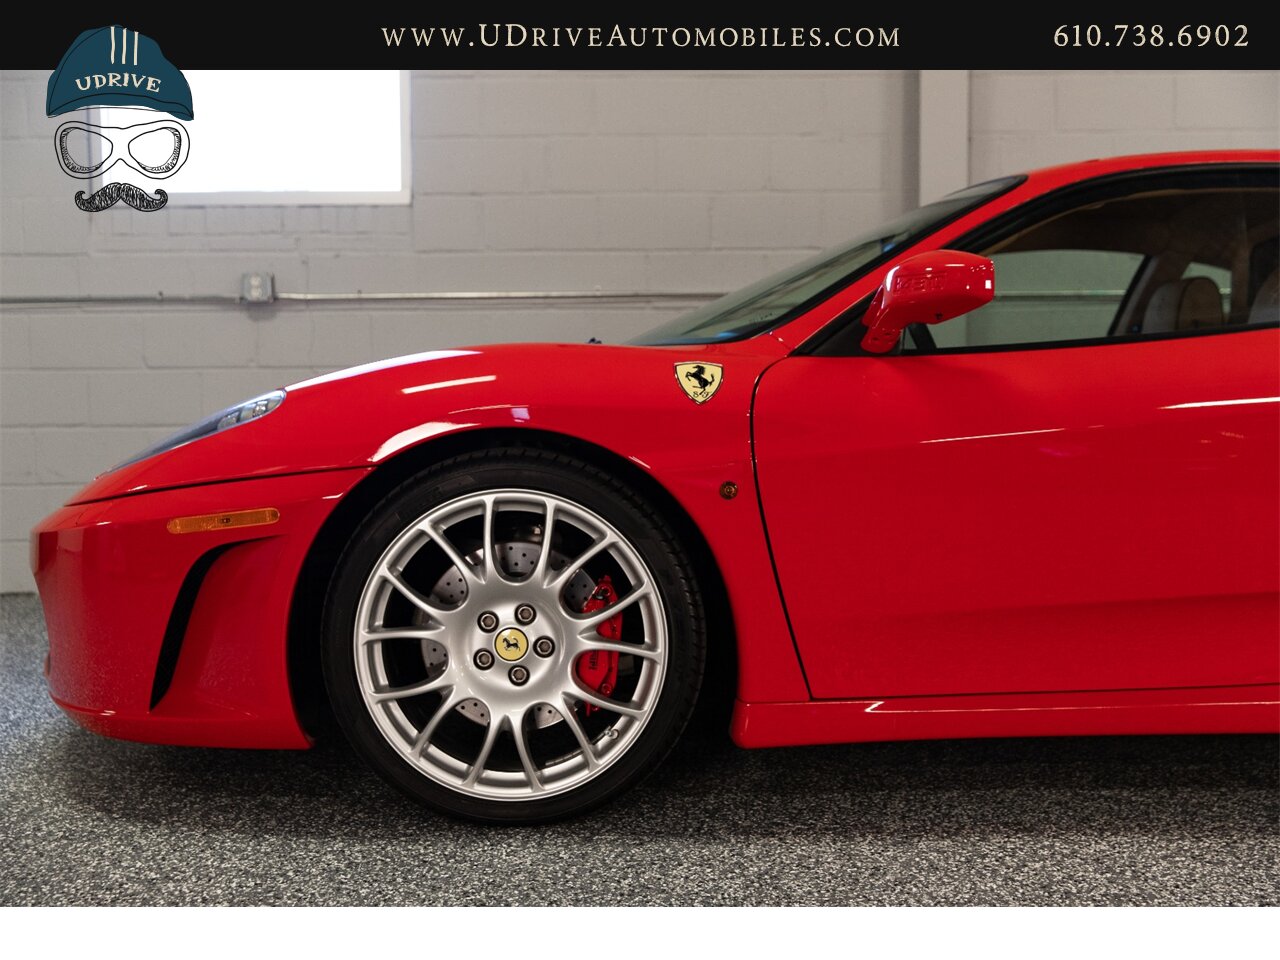 2006 Ferrari F430 F1 Coupe 1 Owner Daytona Seats Challenge Whls  Carbon Fibre Upper Lower Zone Shields Piping Serv Hist $208k MSRP - Photo 6 - West Chester, PA 19382